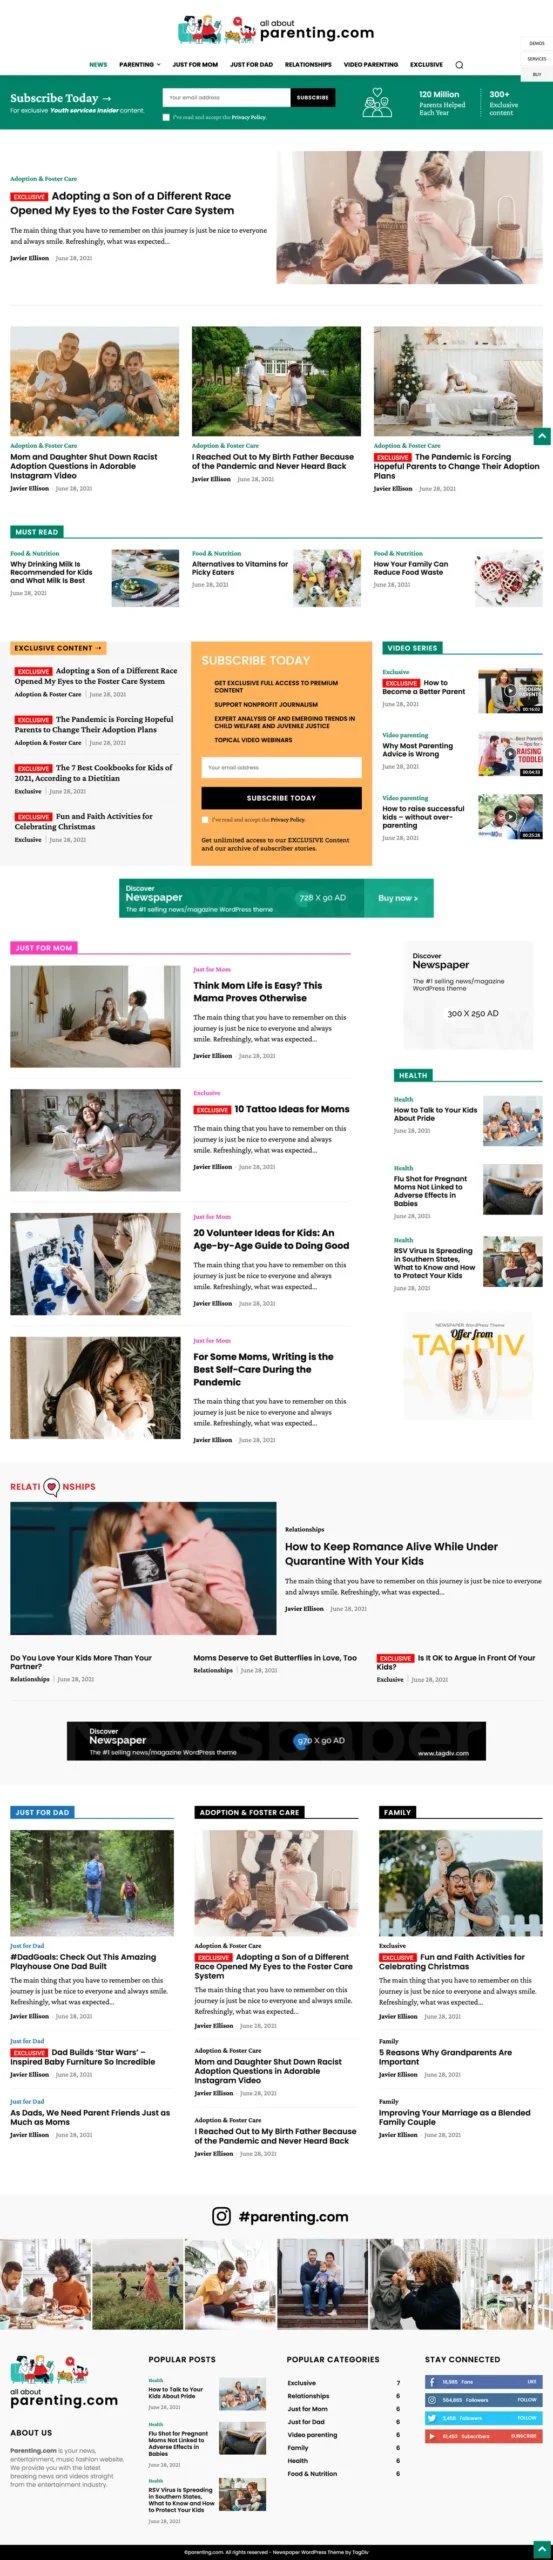 Parenting News Website Design with Free 5GB VPS Web Host